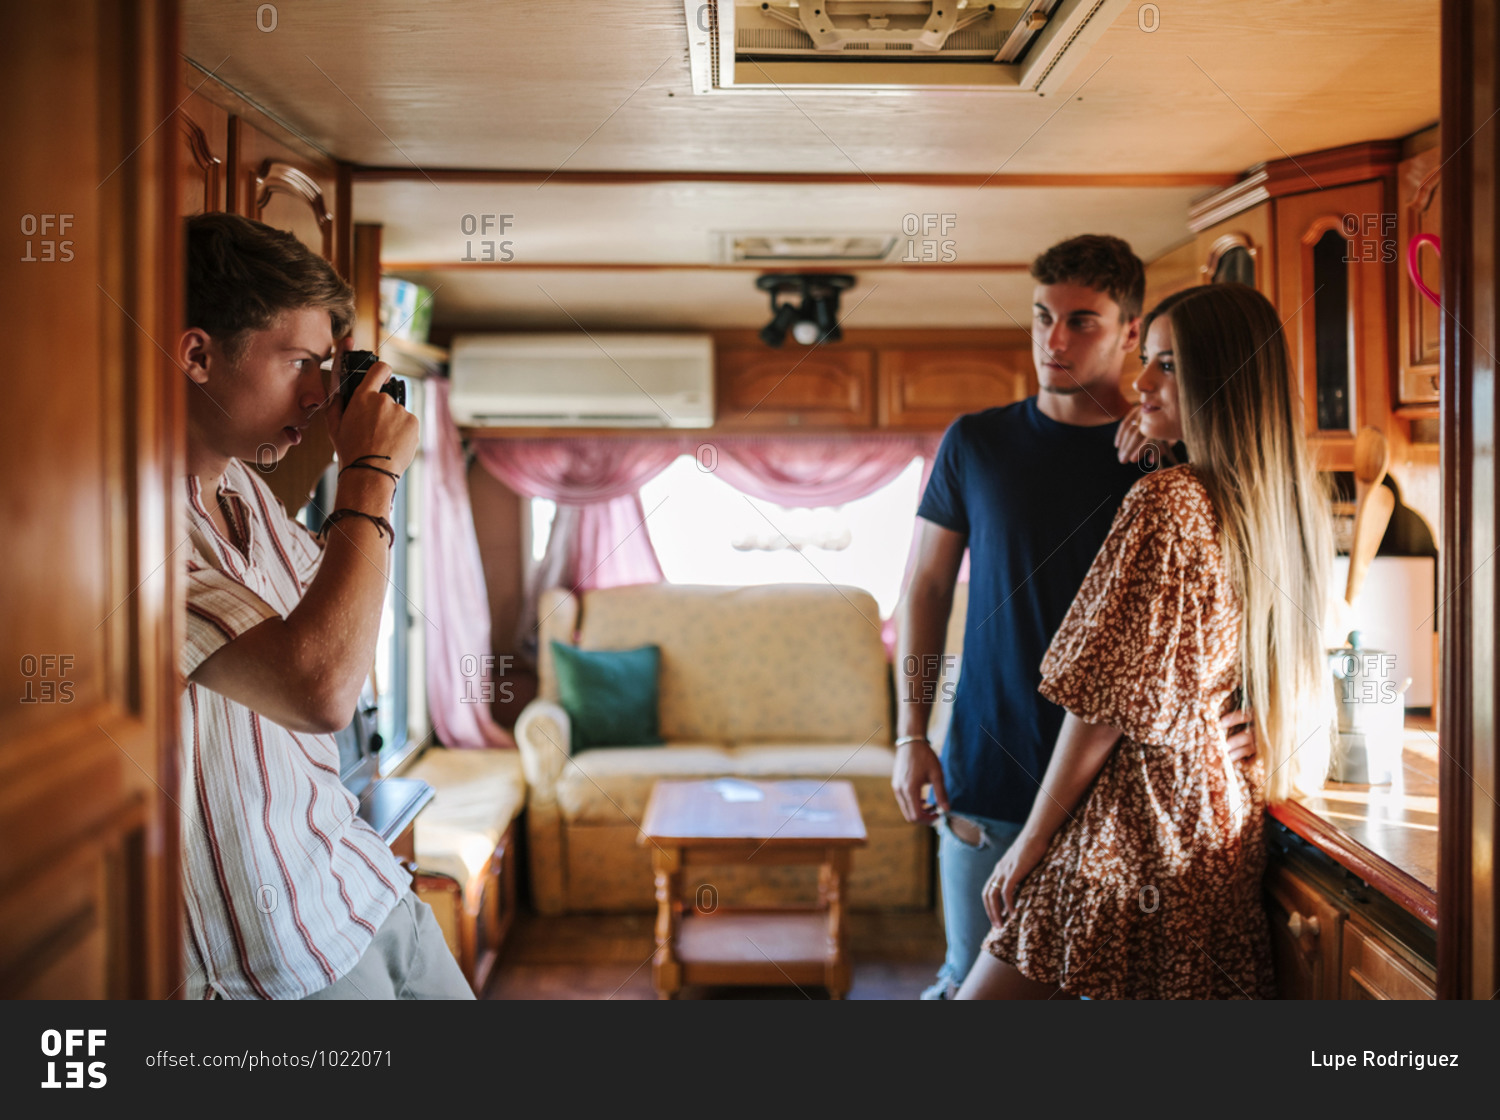 Young man with a camera taking photos of his friends inside a caravan